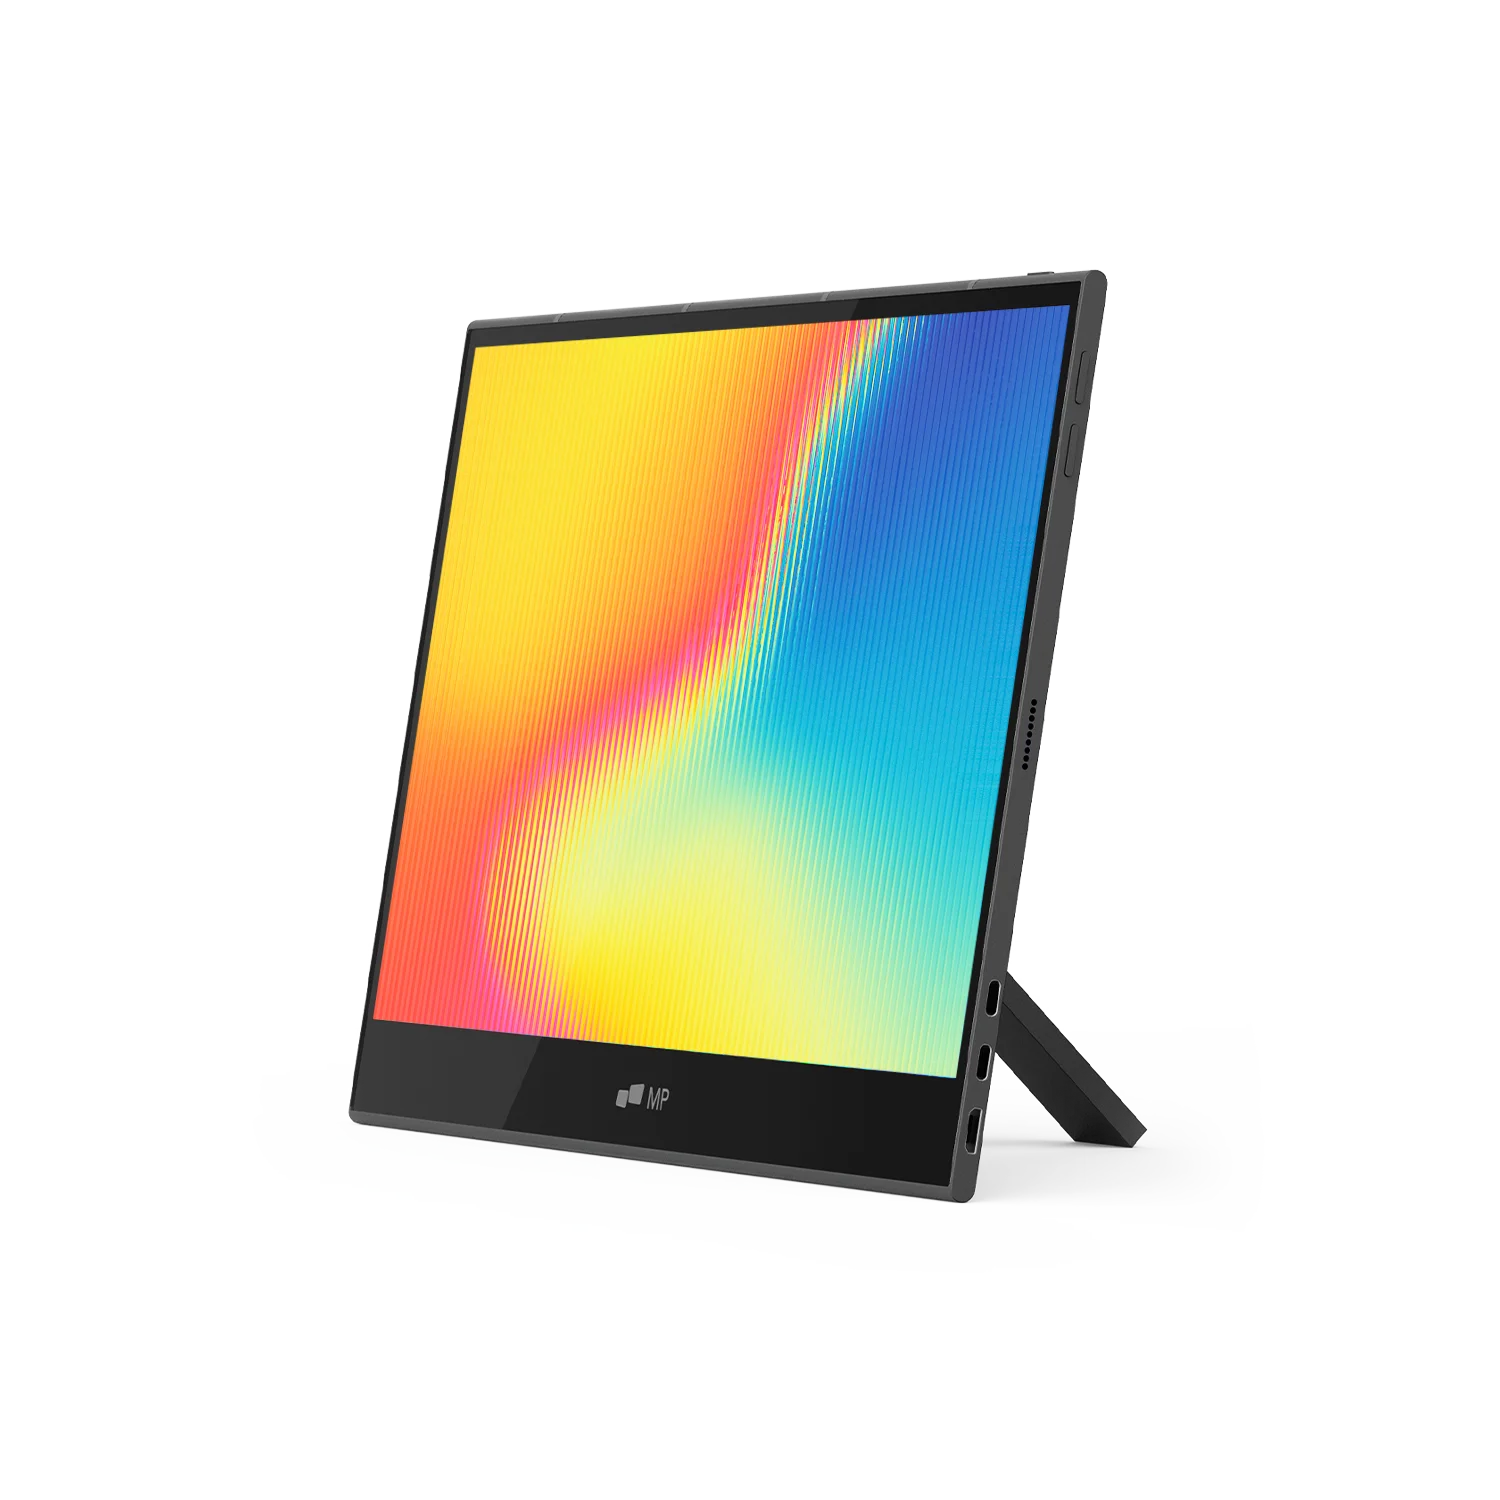 Glance Pro OLED portable touch screen monitor for Laptop